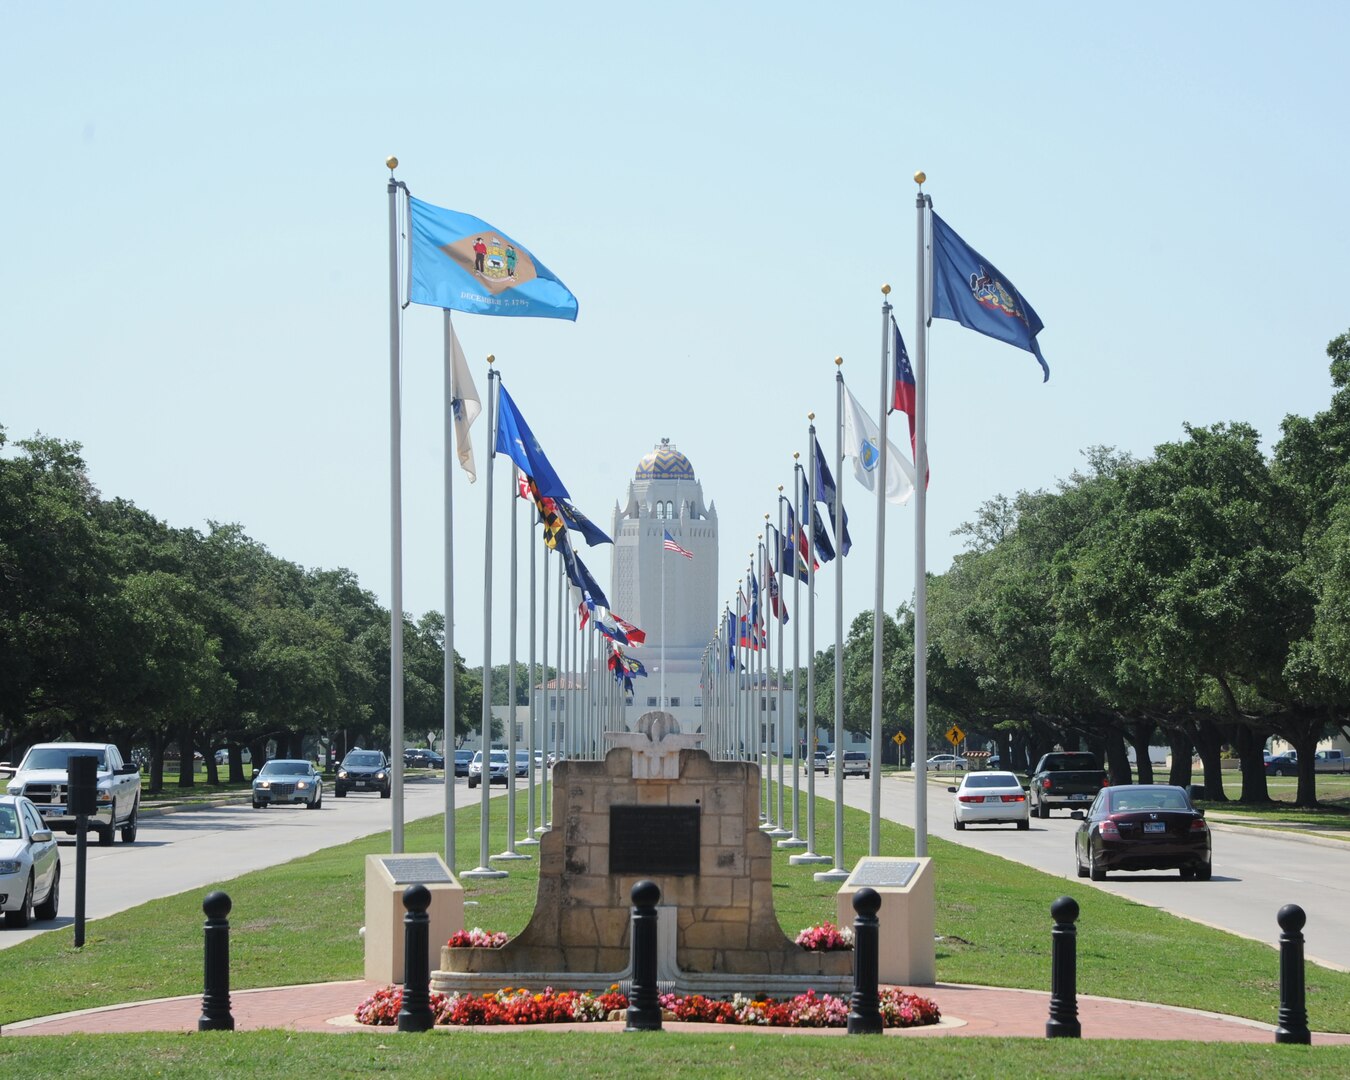 The flags - one for each state of the 50 U.S. states - compliment the landmark Taj Mahal, June 1, 2012, Joint Base San Antonio-Randolph, Texas. The flags on Harmon Drive were officially dedicated by the Air Force Sergeants Association, Chapter 1075, on Feb. 27, 1985.